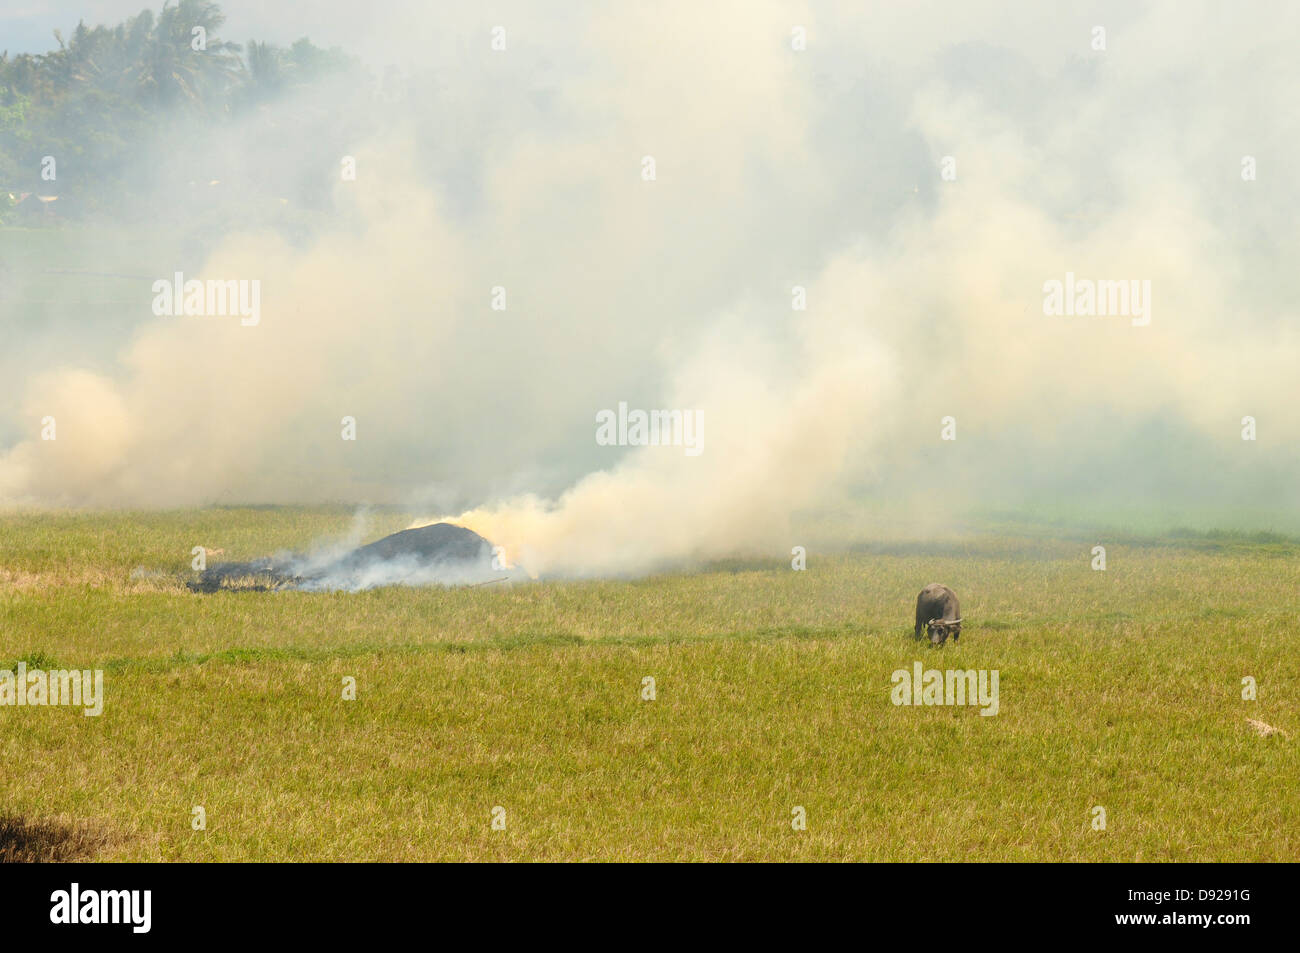 Grazing carabao in smoke on the rice field. Sunny weather over Mindoro Island, Philippines Stock Photo